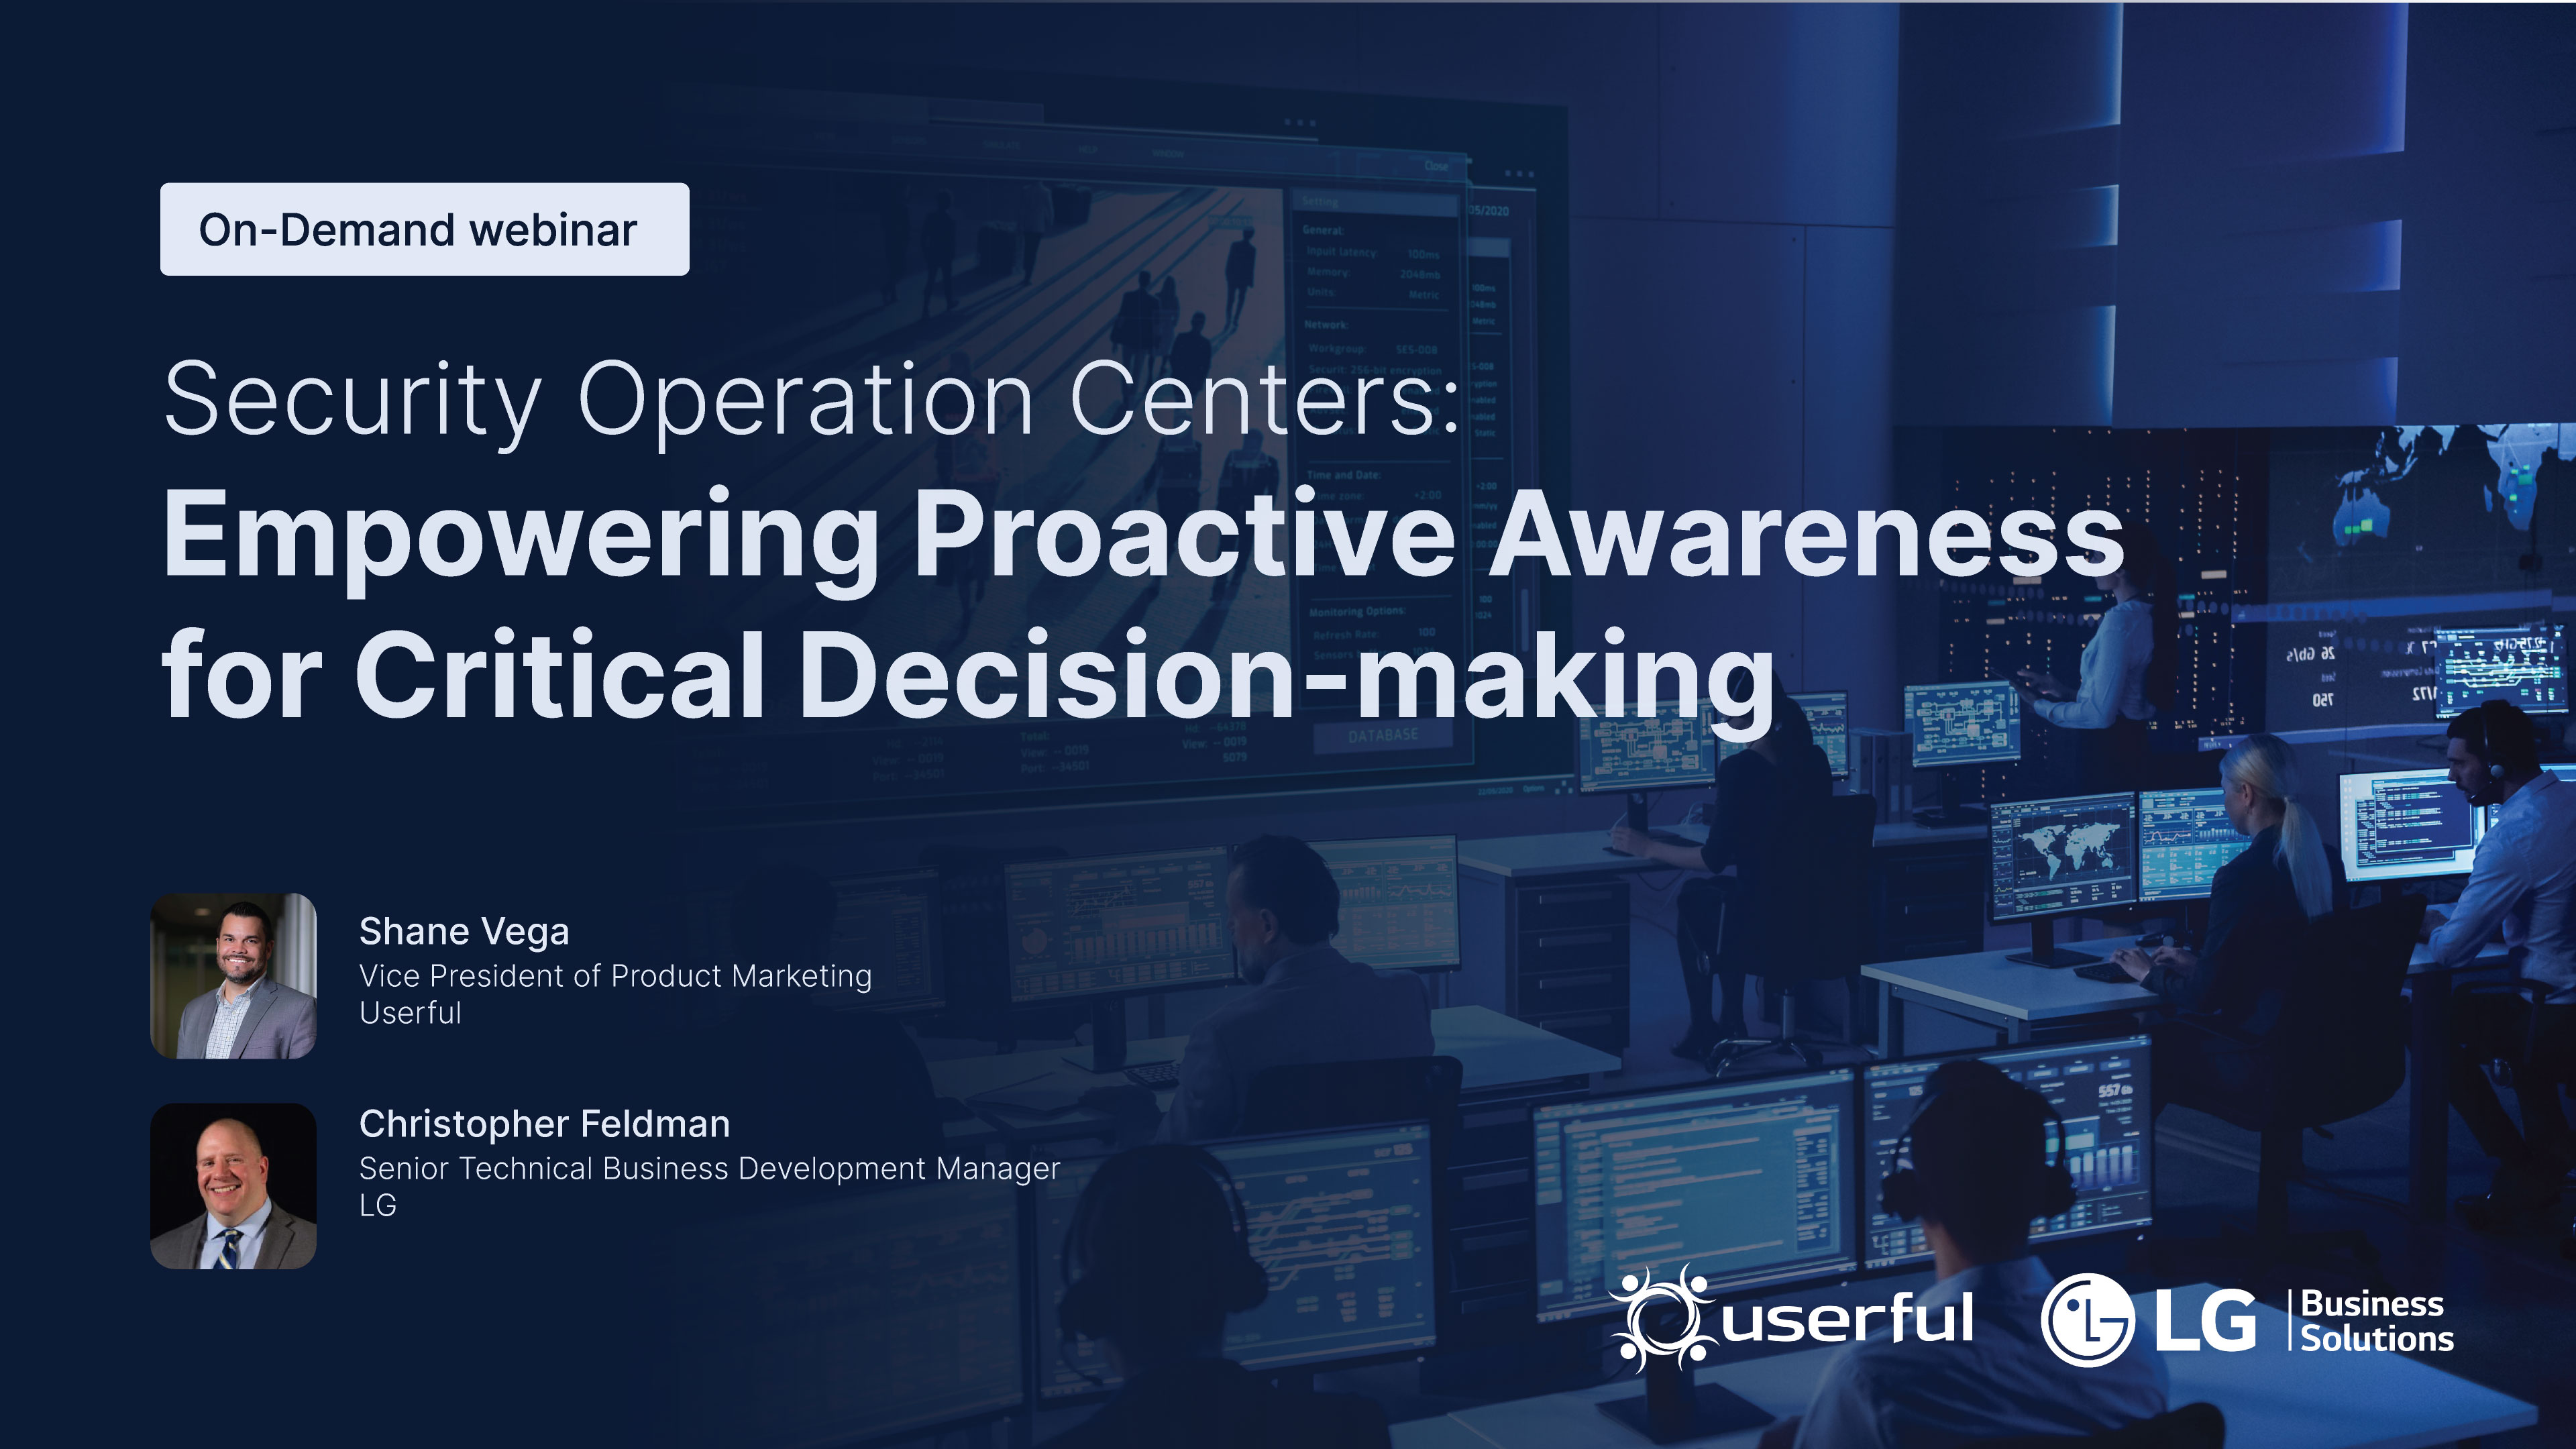 Webinar by Shane Vega at Userful and Christopher Feldman at LG, Security Operation Centers: Empowering Proactive Awareness for Critical Decision-making